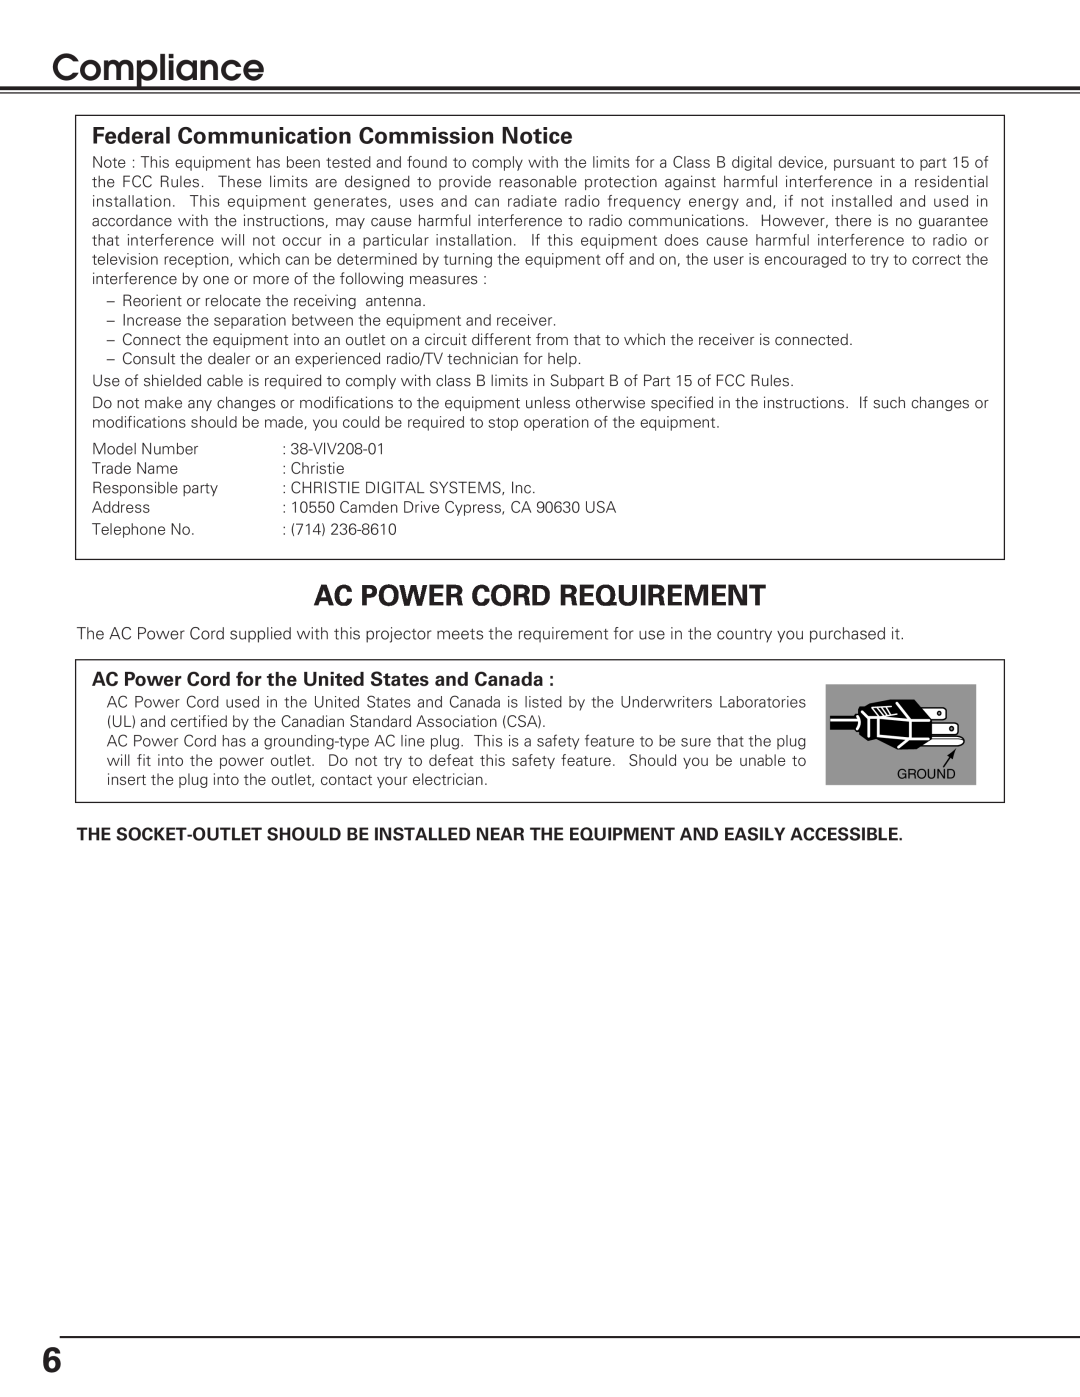 Christie Digital Systems 38-VIV208-01 Compliance, Ac Power Cord Requirement, Federal Communication Commission Notice 